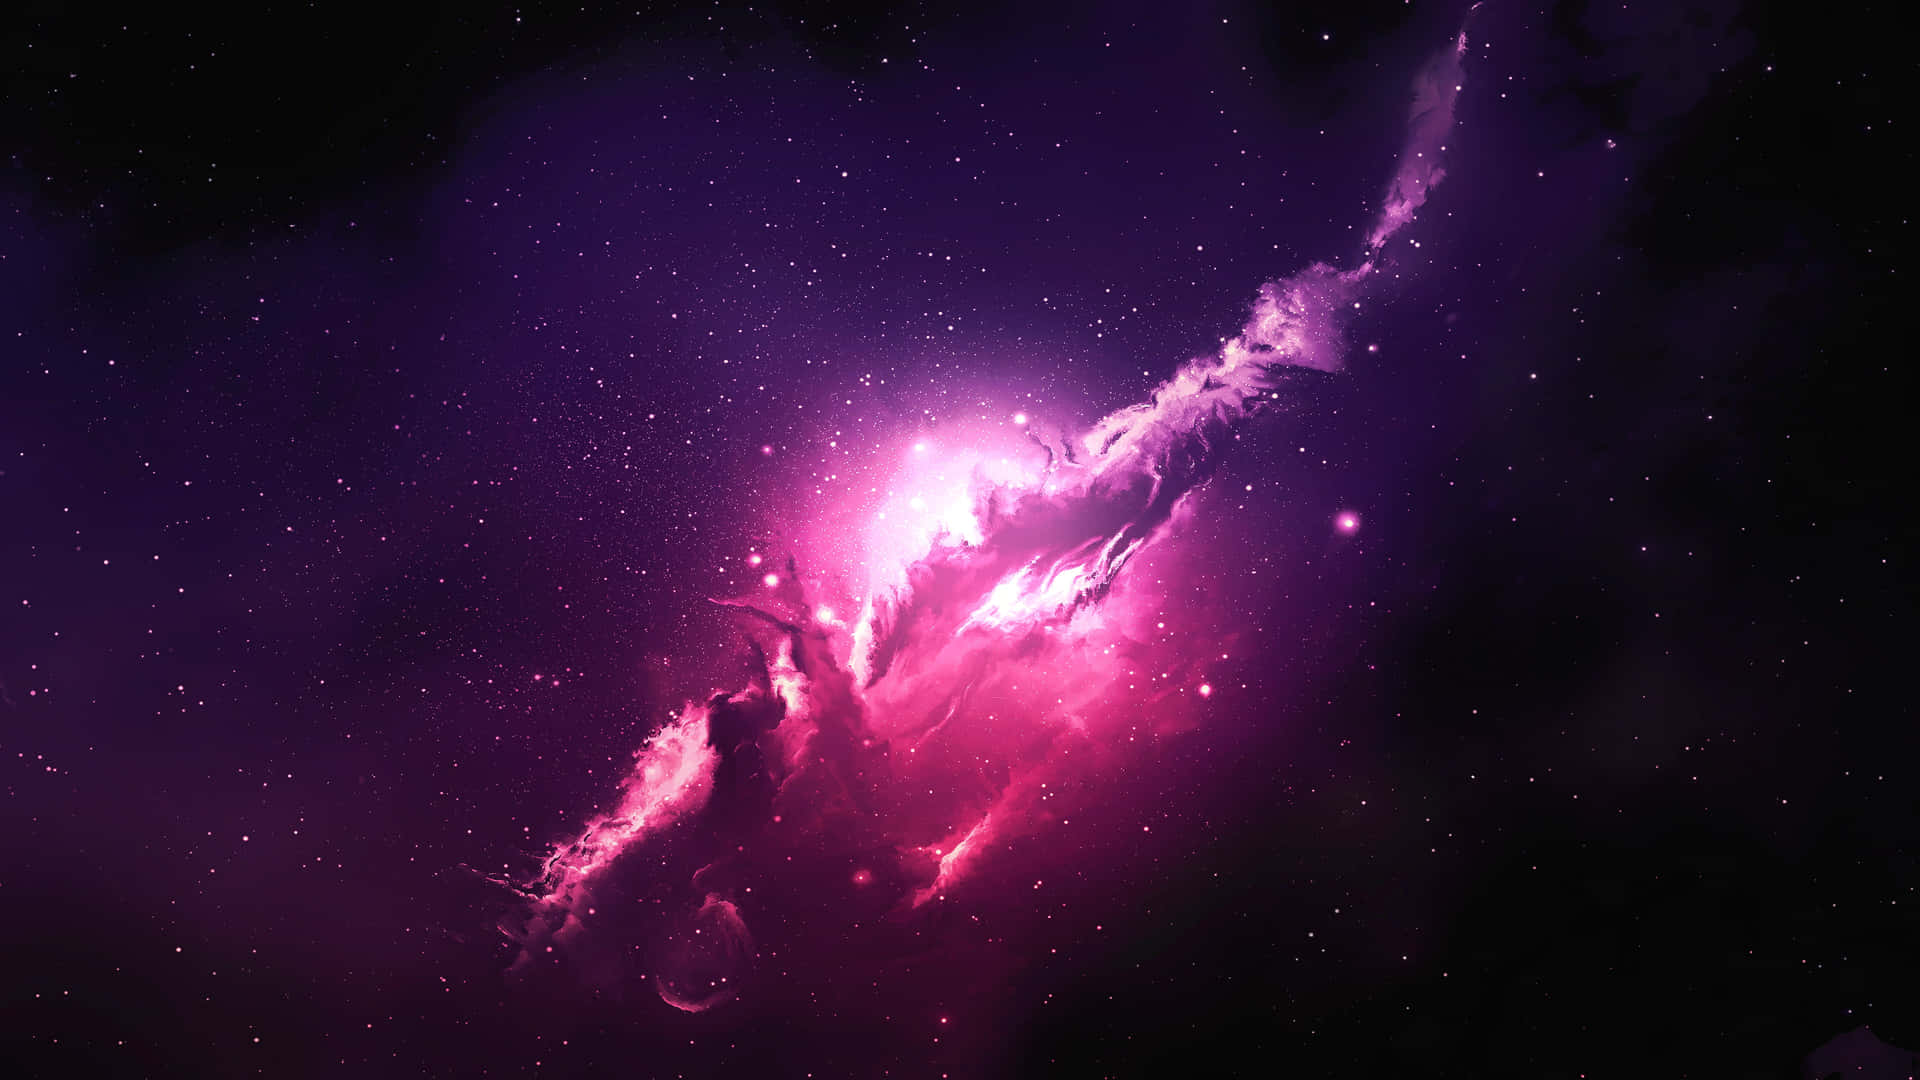 Stargaze into the Depths of a Dreamy Black and Purple Galaxy Wallpaper